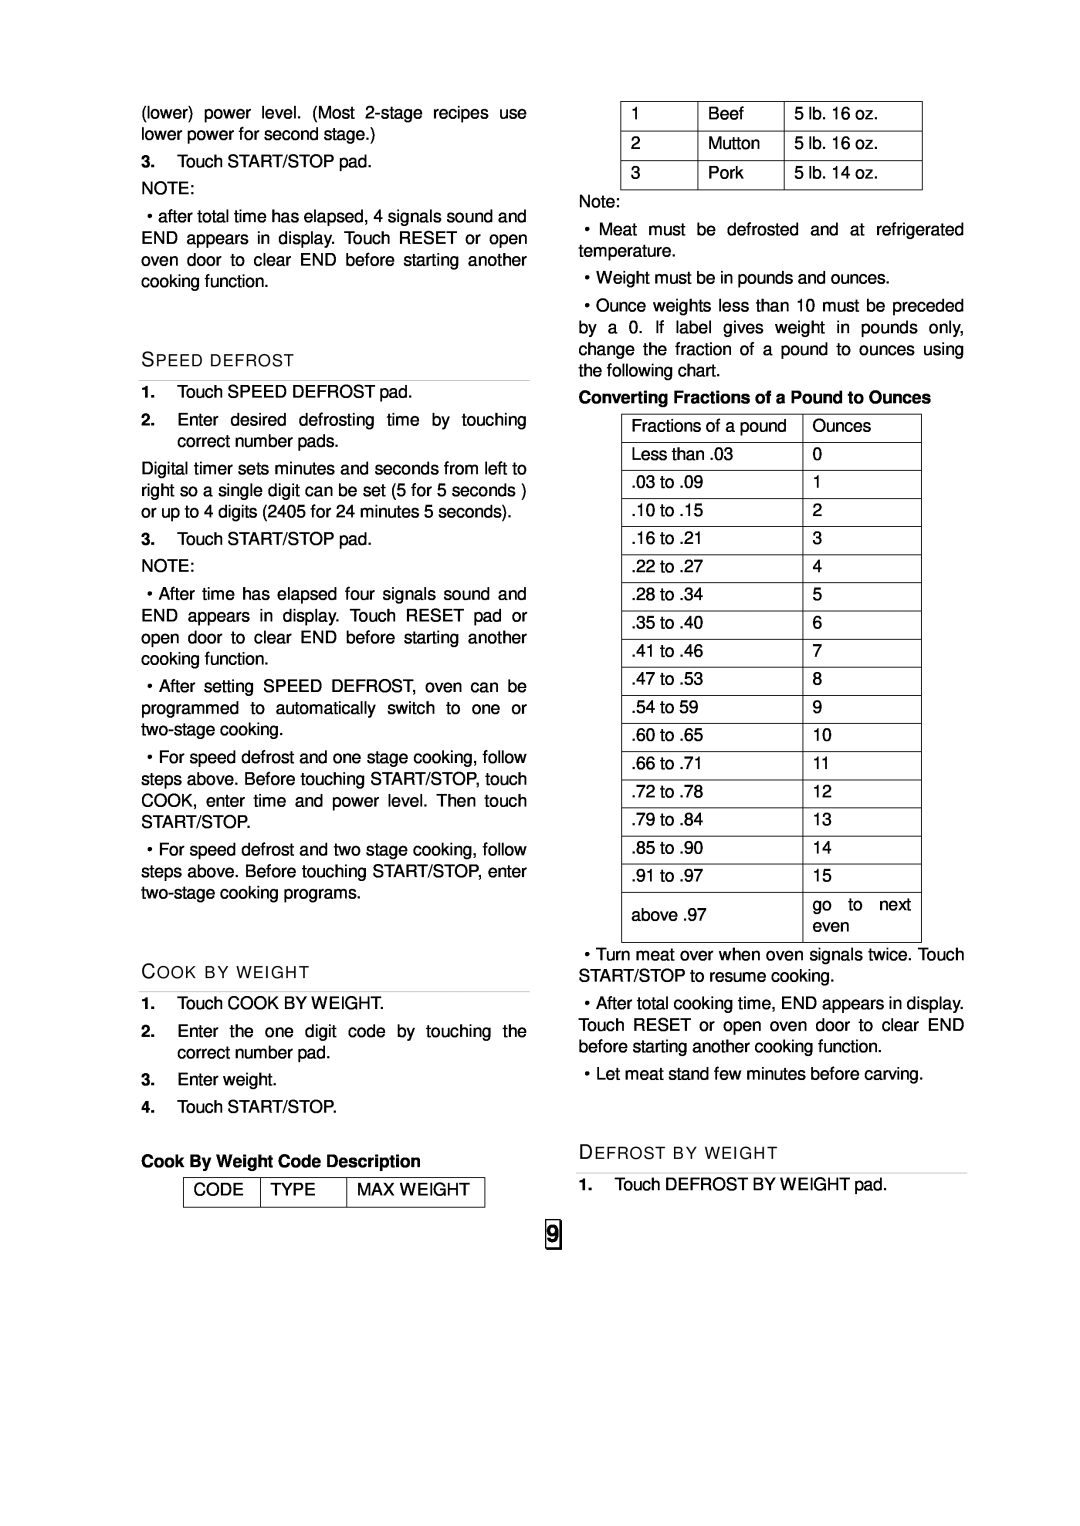 Sunbeam SMW992 owner manual Cook By Weight Code Description, Converting Fractions of a Pound to Ounces 